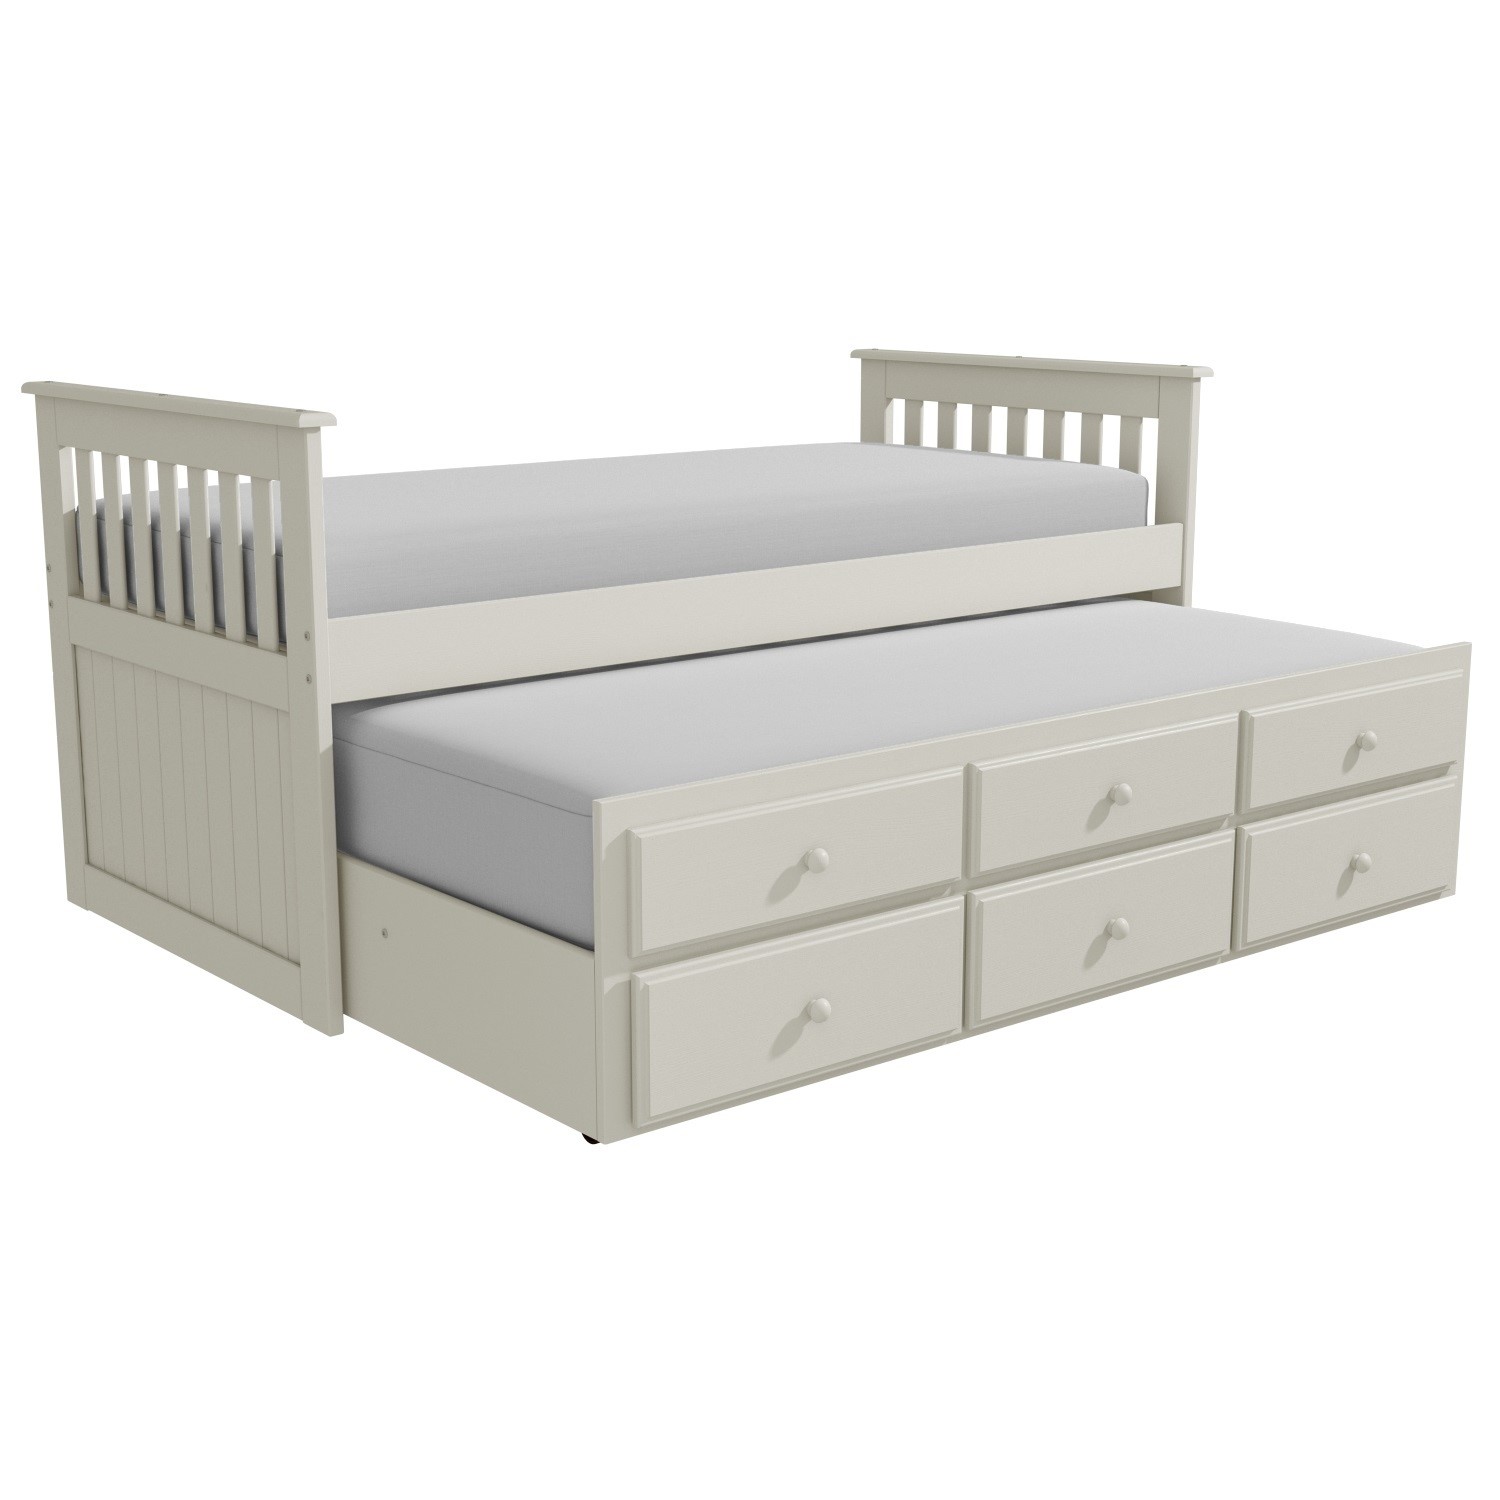 Trundle Bed With Storage Drawers